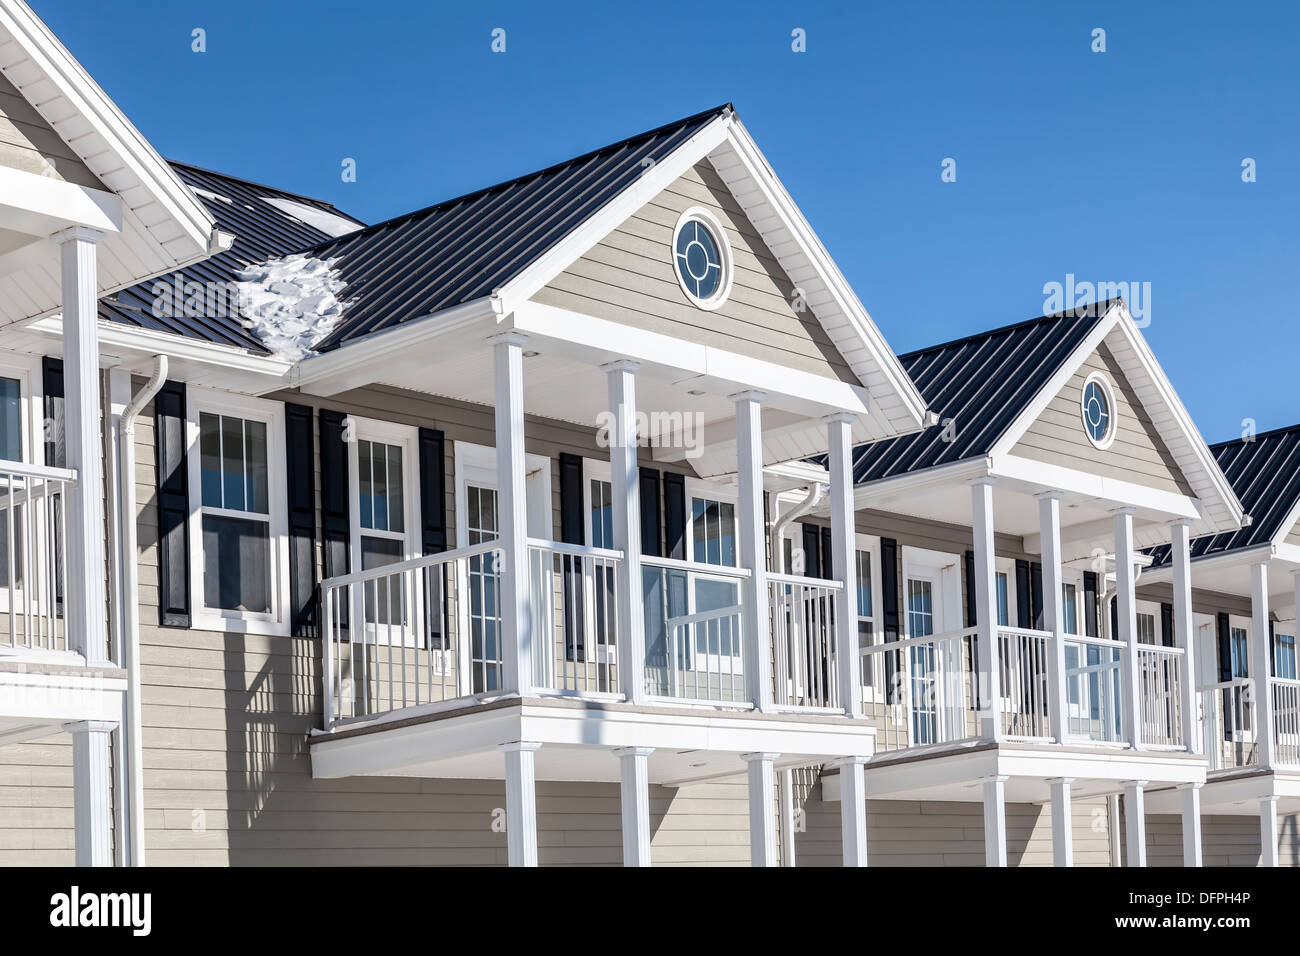 New townhouses under a layer of freshly fallen snow. Stock Photo